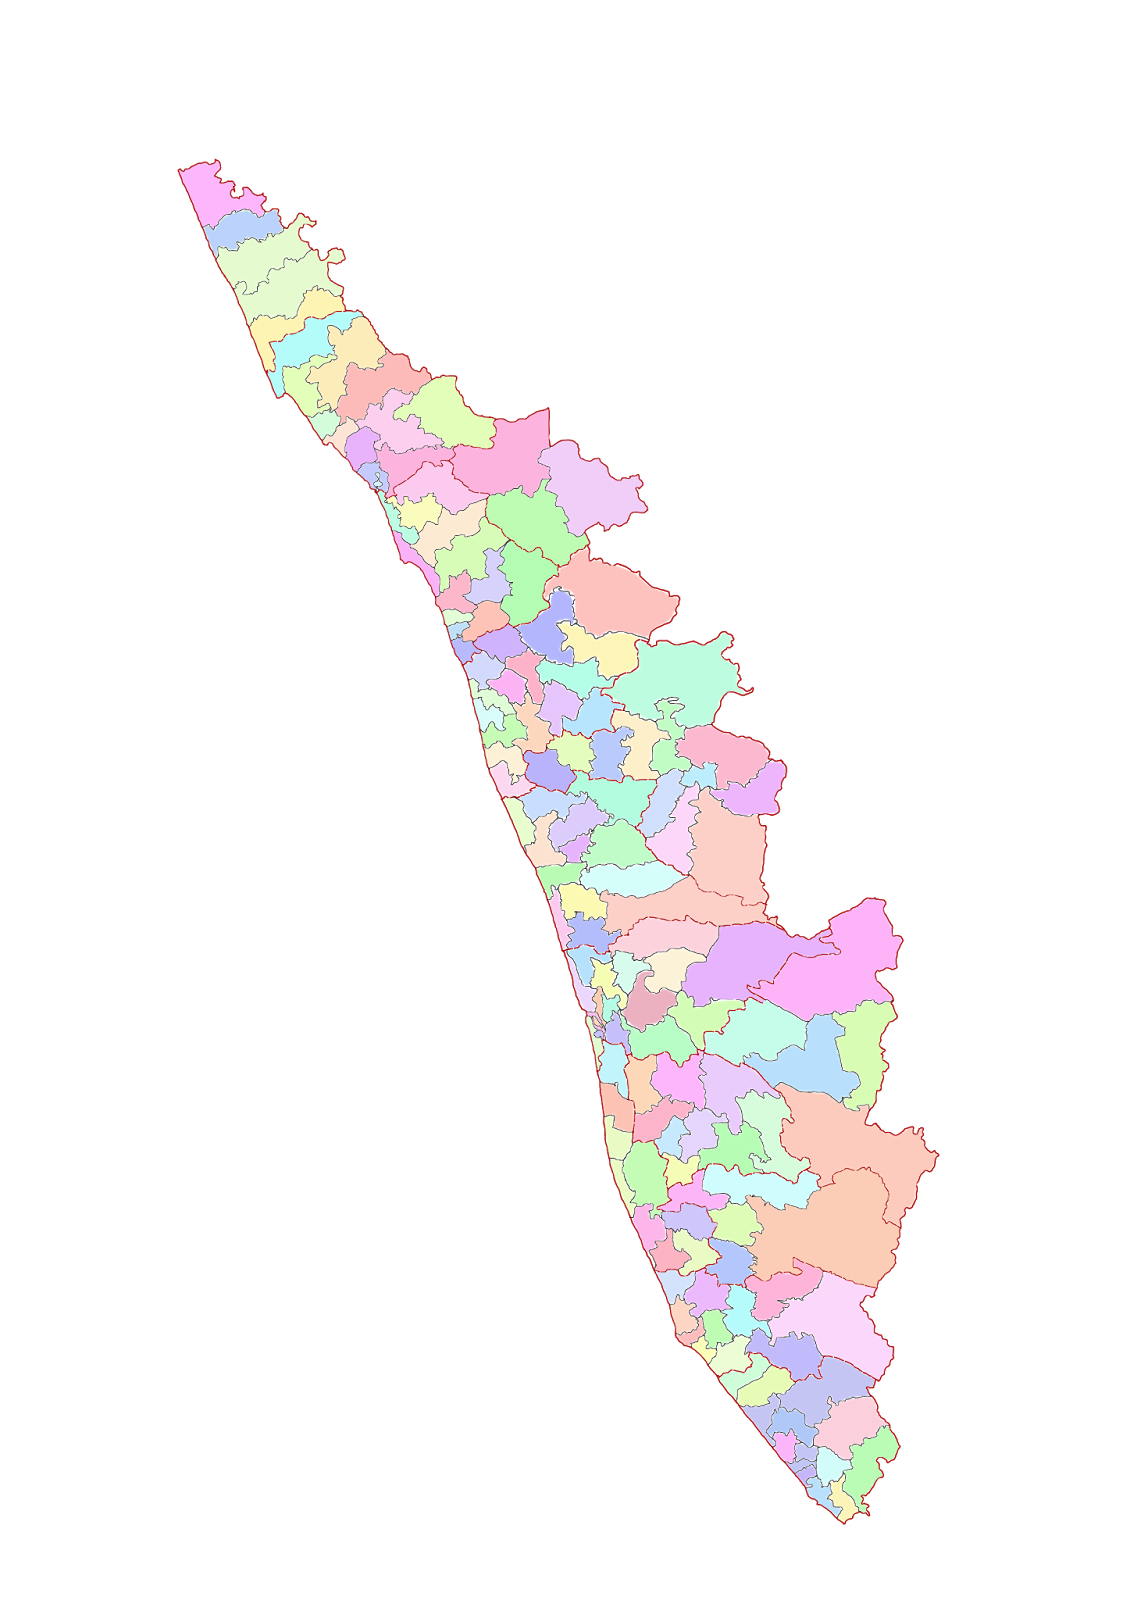 Words and what not: #Wikidata - Kerala MLA constituencies